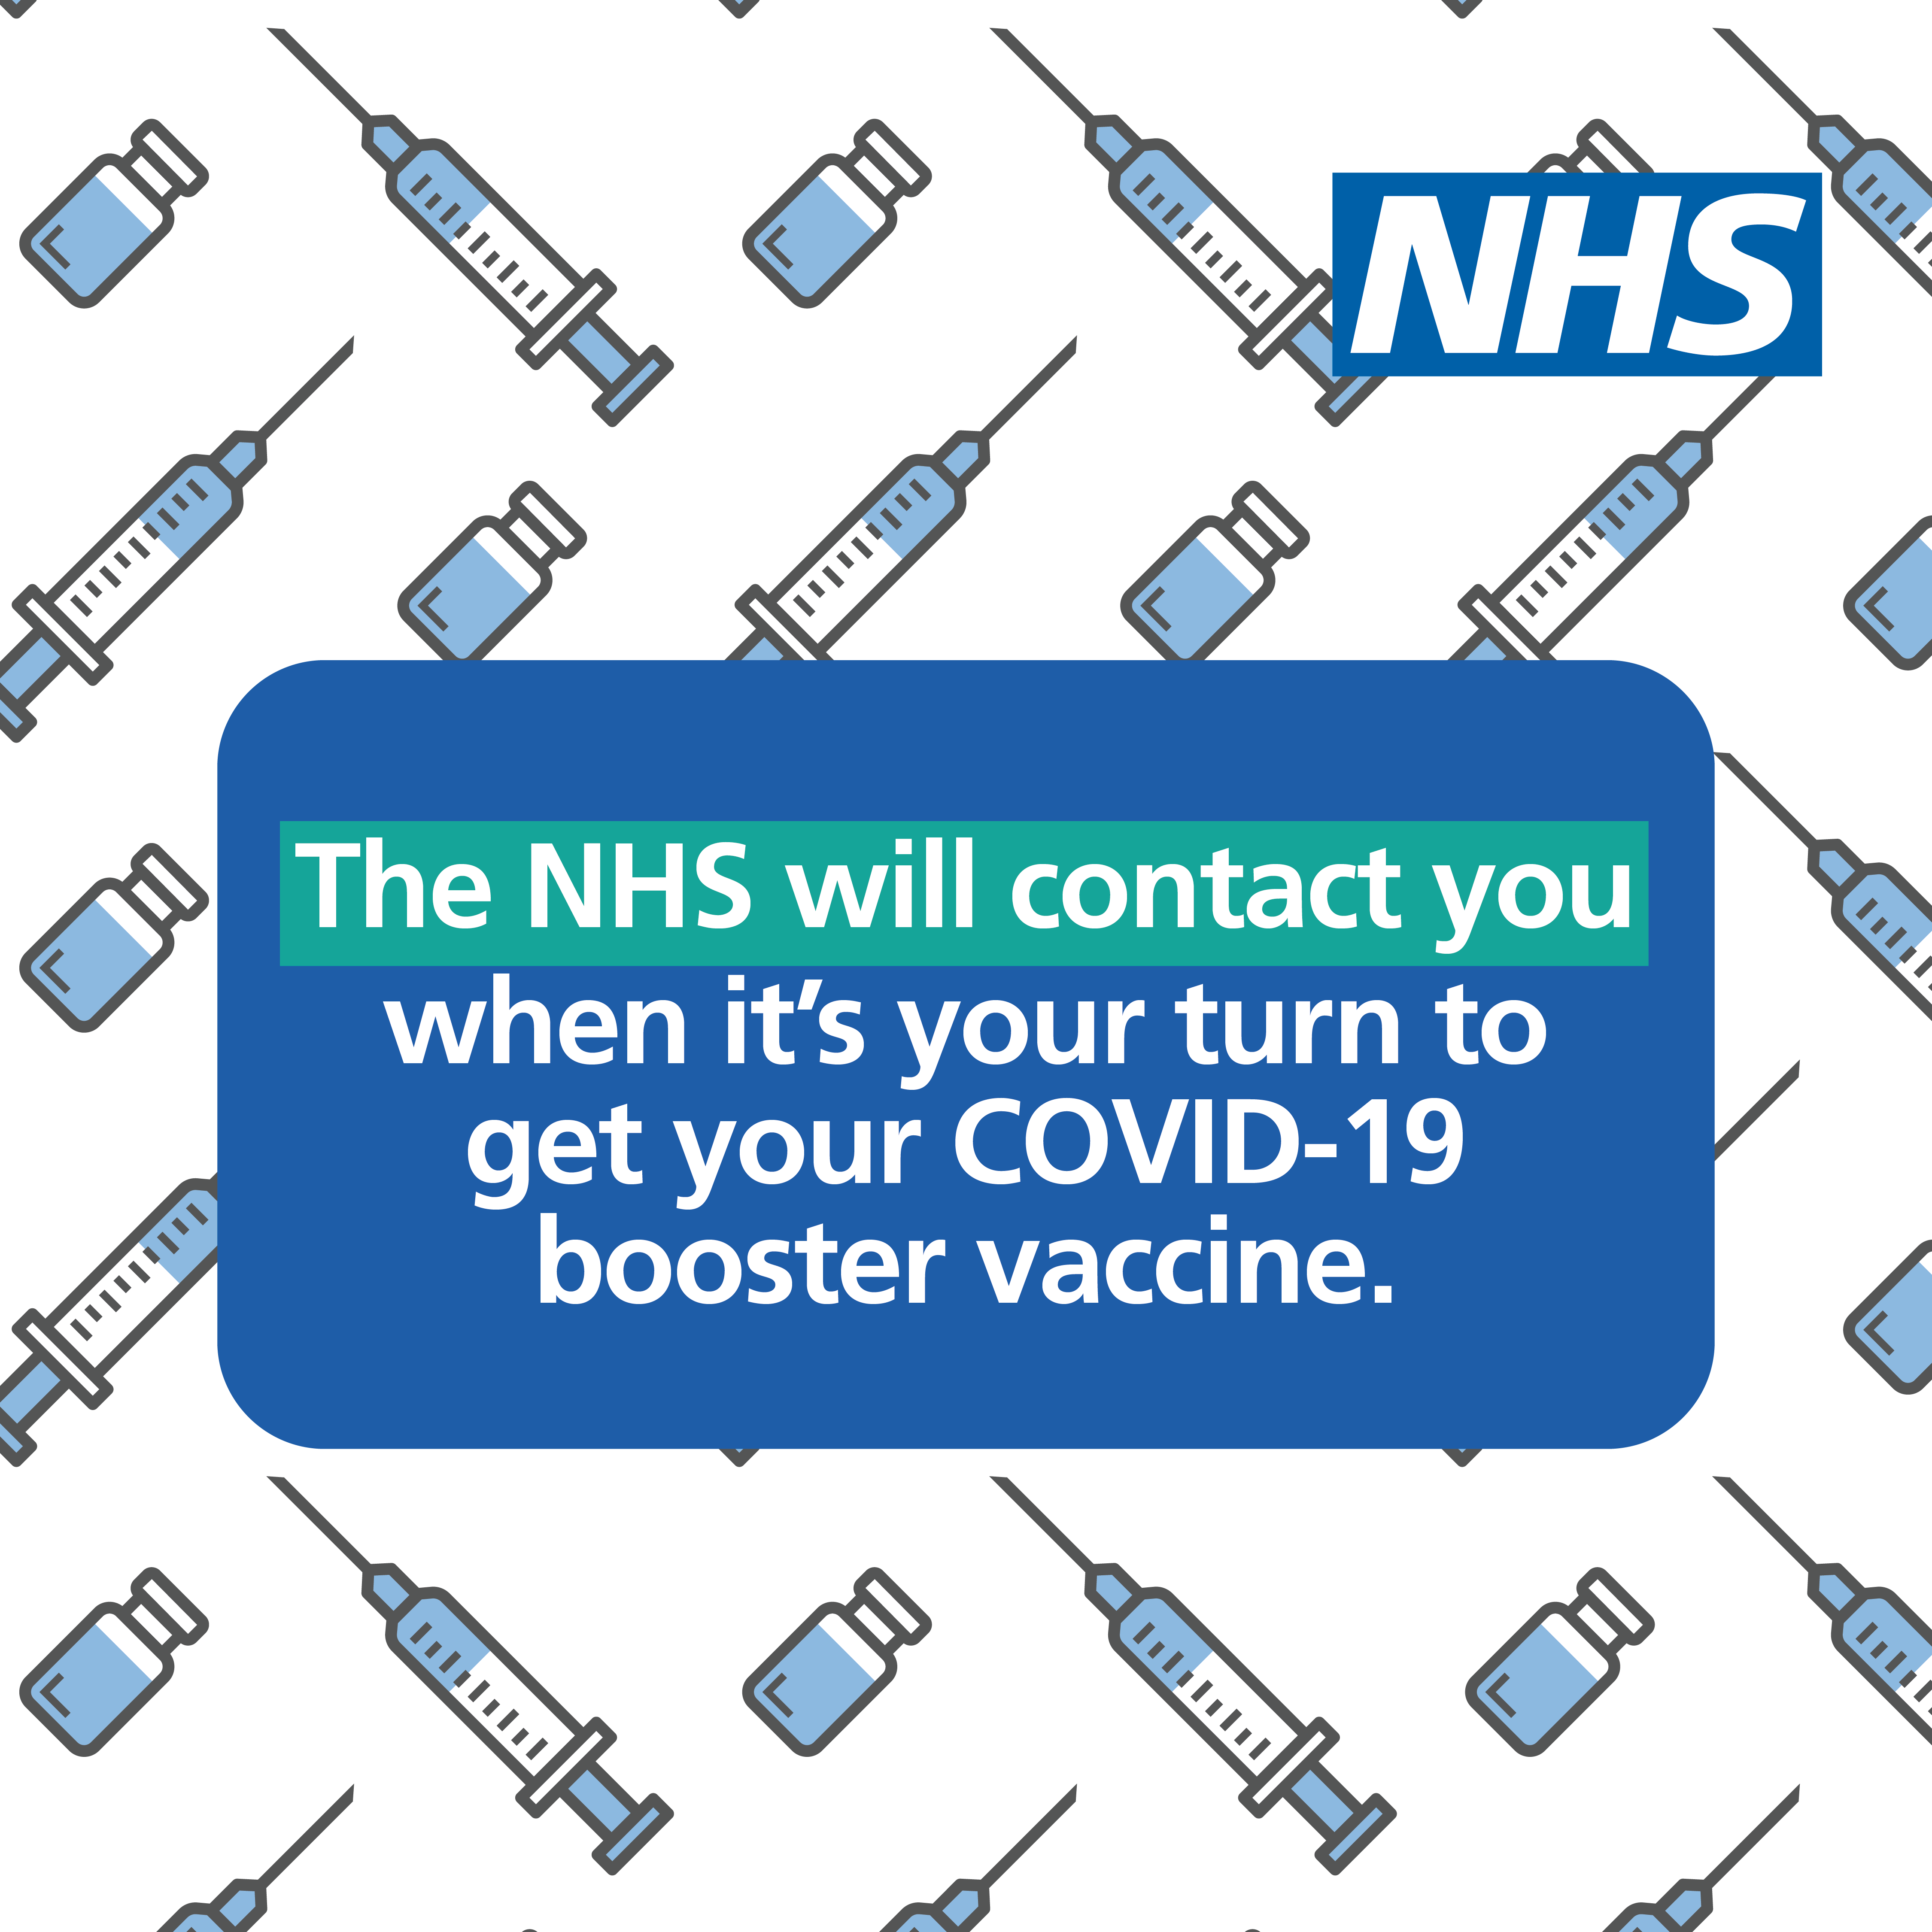 The NHS will contact you when it